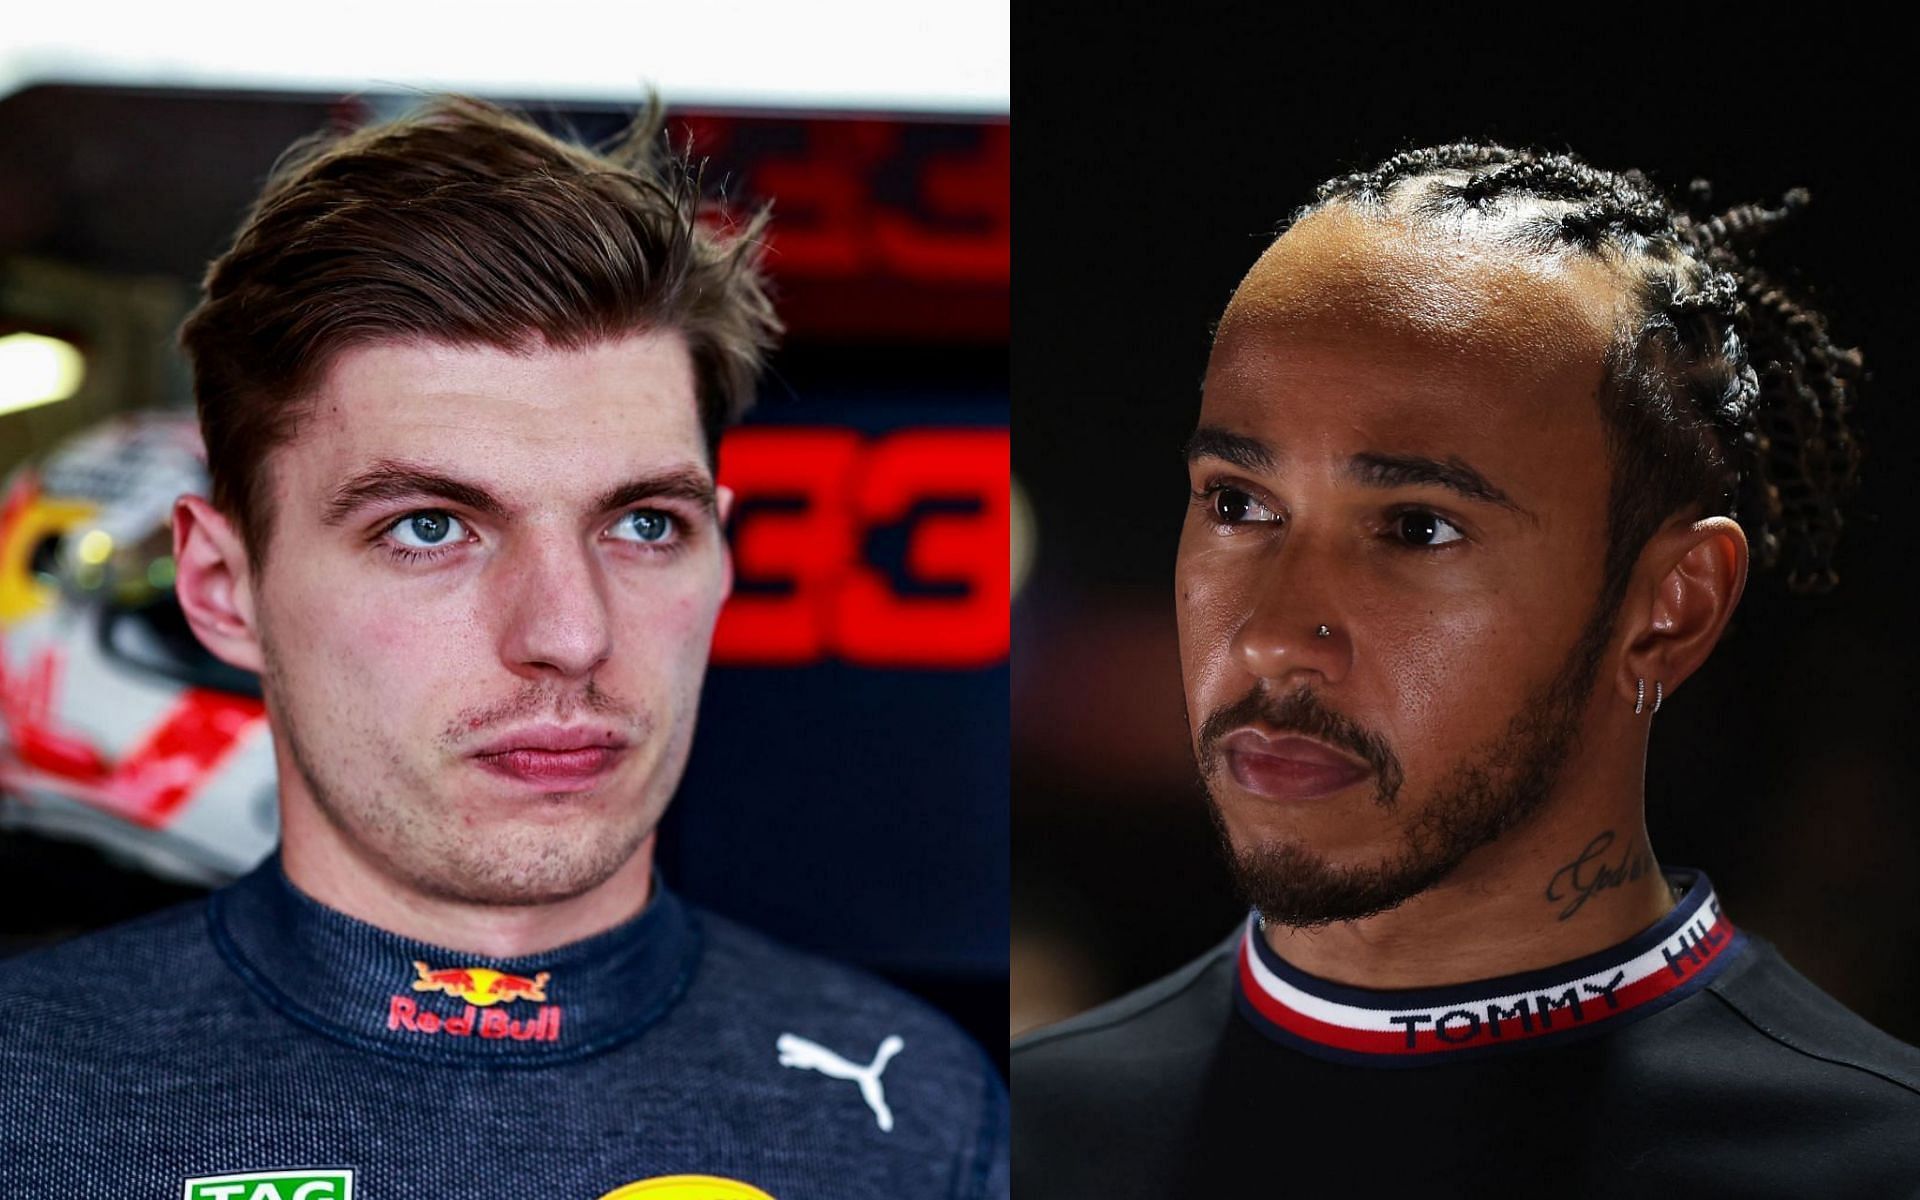 Max Verstappen (left) beat Lewis Hamilton (right) on the final lap of the Abu Dhabi Grand Prix to clinch his maiden F1 world championship